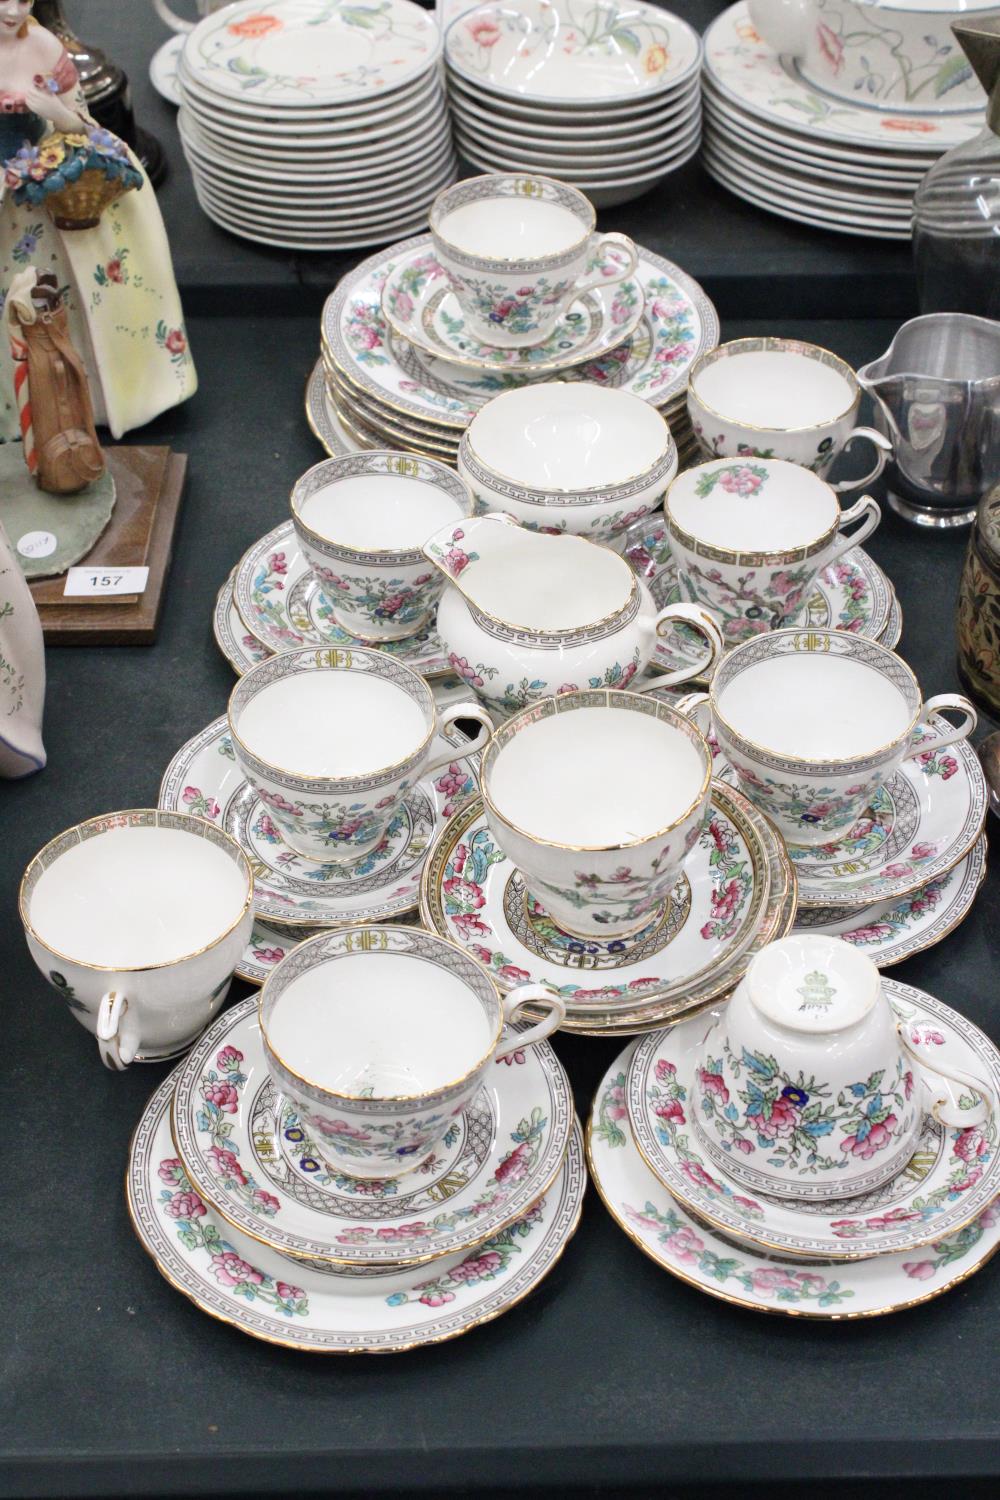 A VINTAGE AYNSLEY 'INDIAN TREE' TEASET TO INCLUDE, A CREAM JUG, SUGAR BOWL, CUPS, SAUCERS AND SIDE